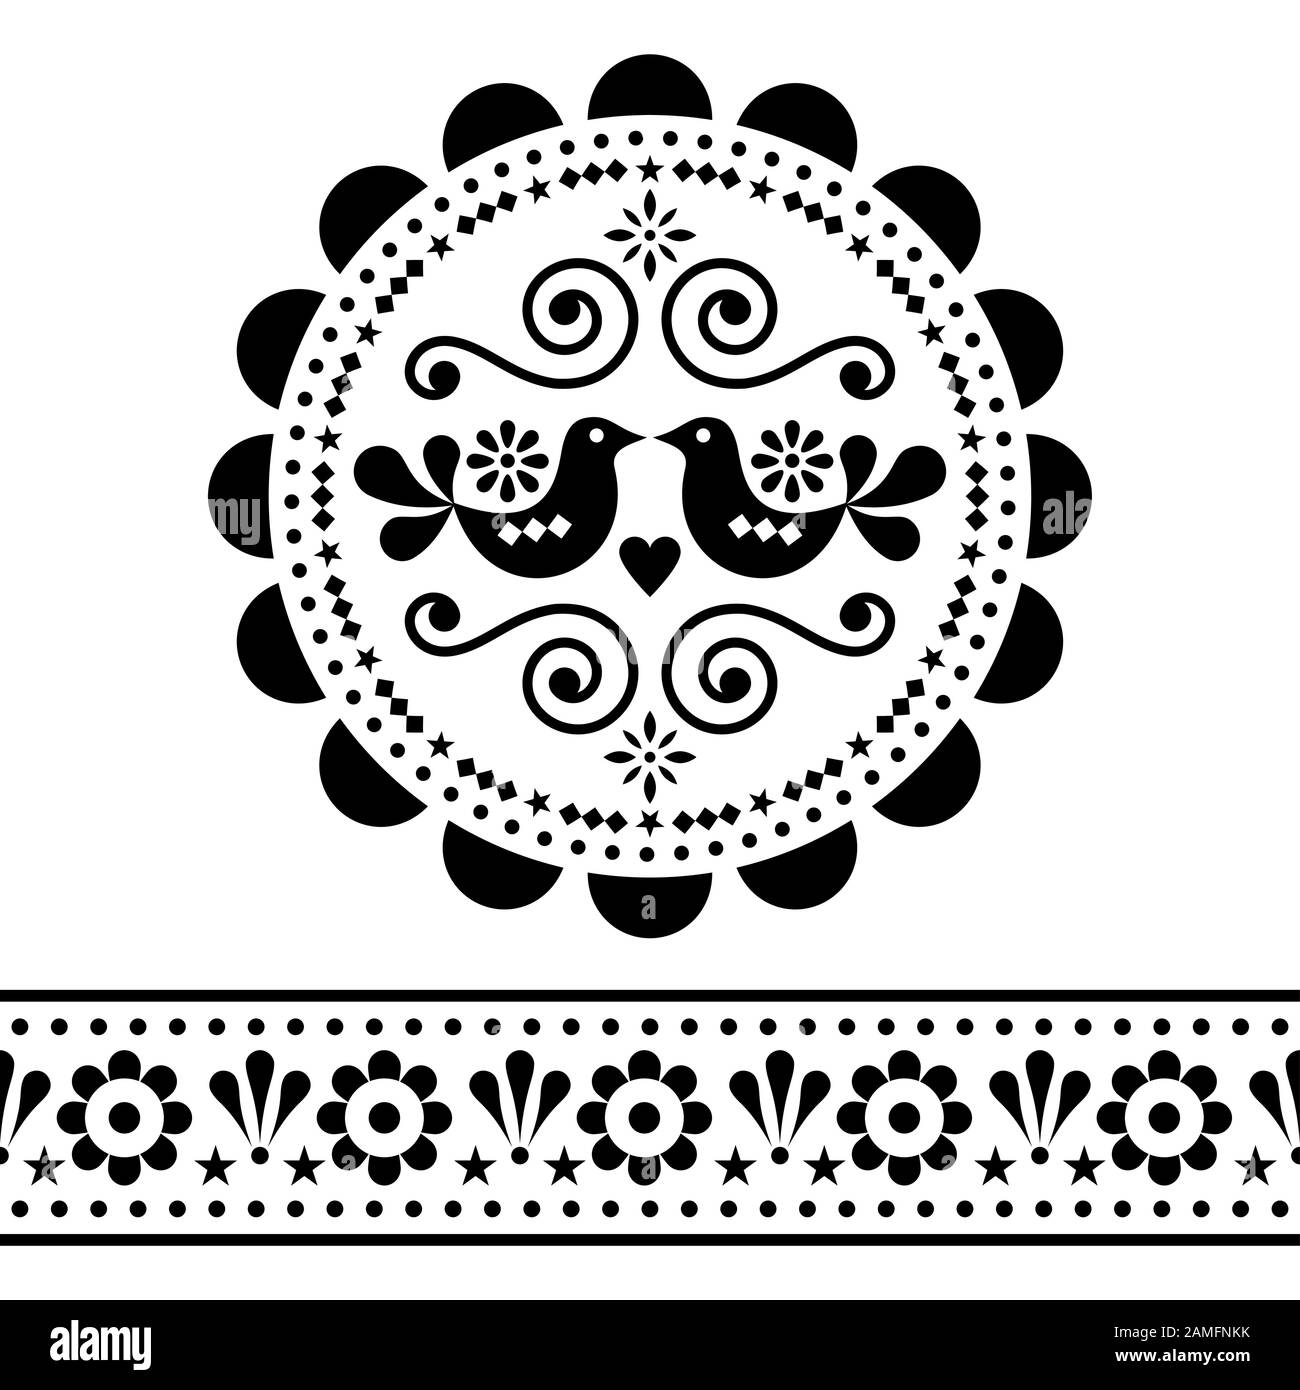 Scandinavian folk vector design pattern set - round and seamless design, cute floral ornament with birds in black on white background Stock Vector